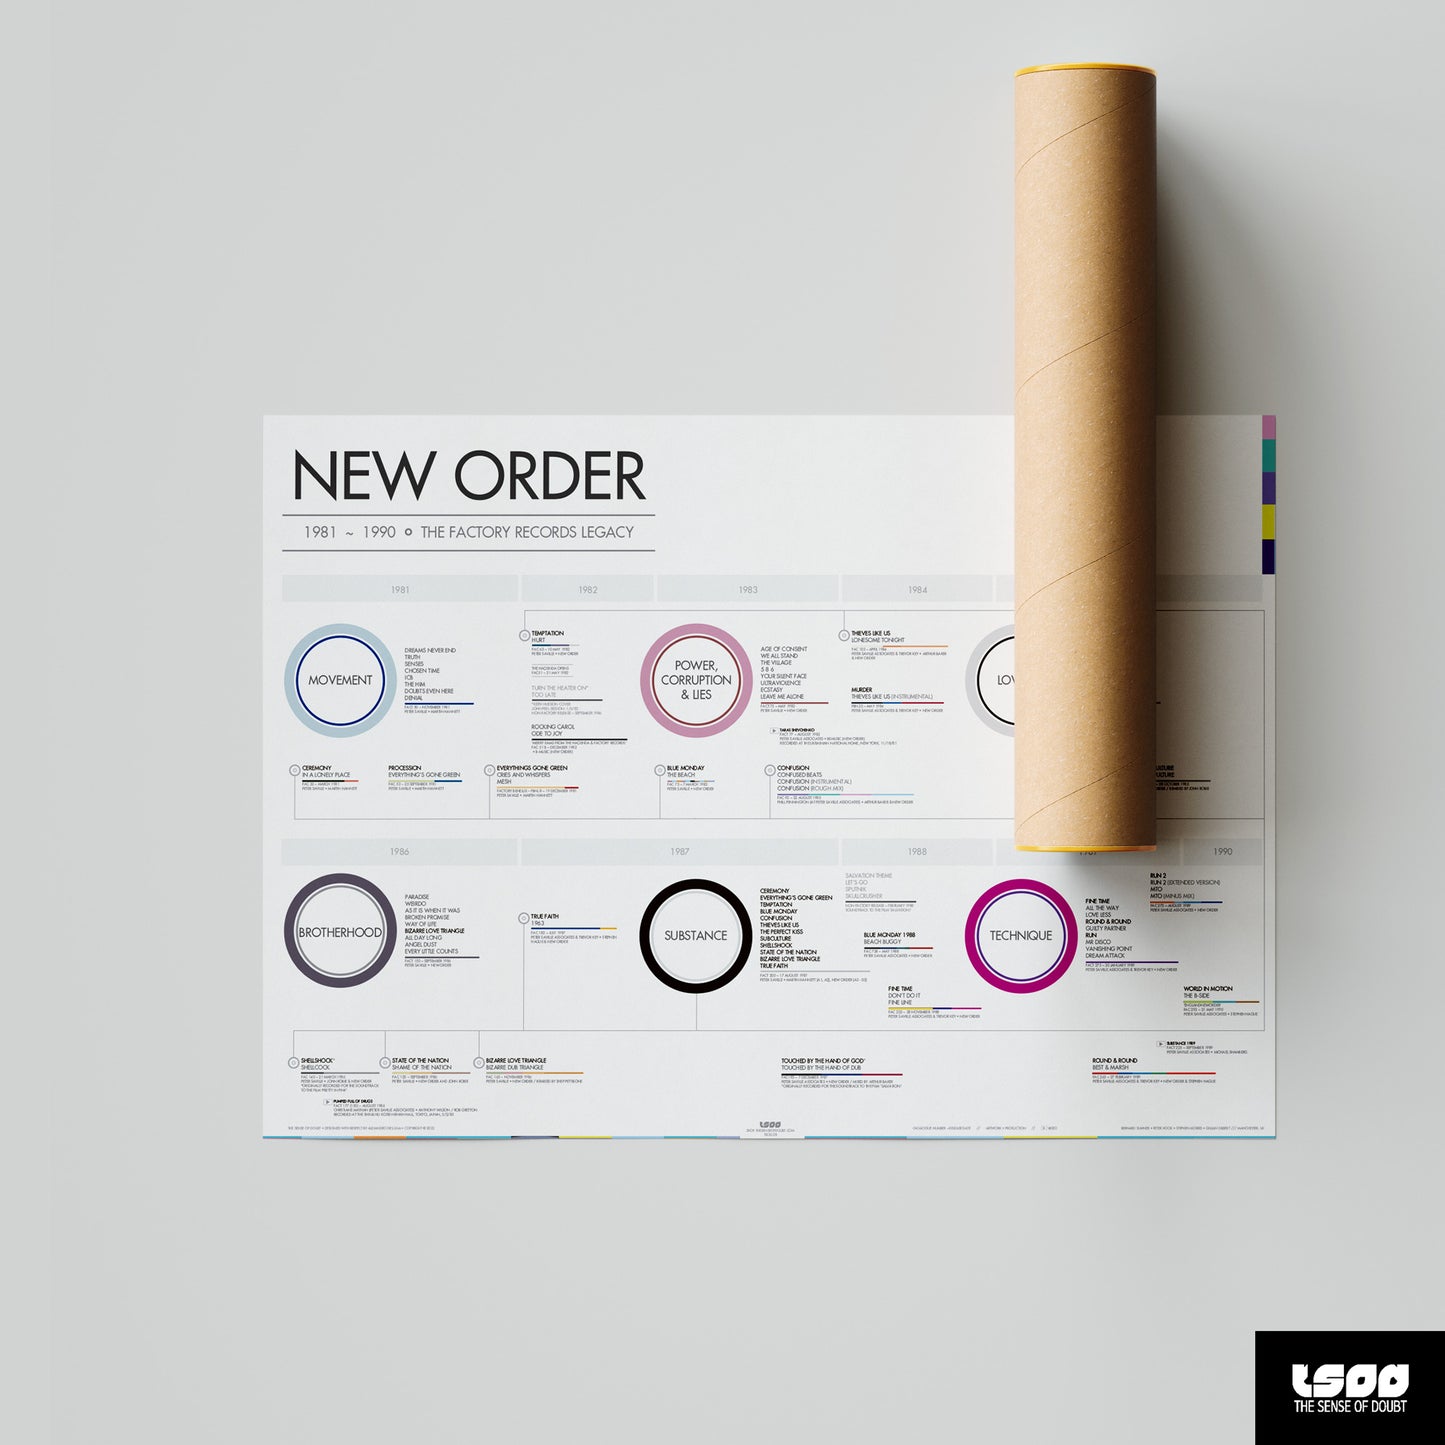 New Order - The Factory Records Years (1981 - 1990)